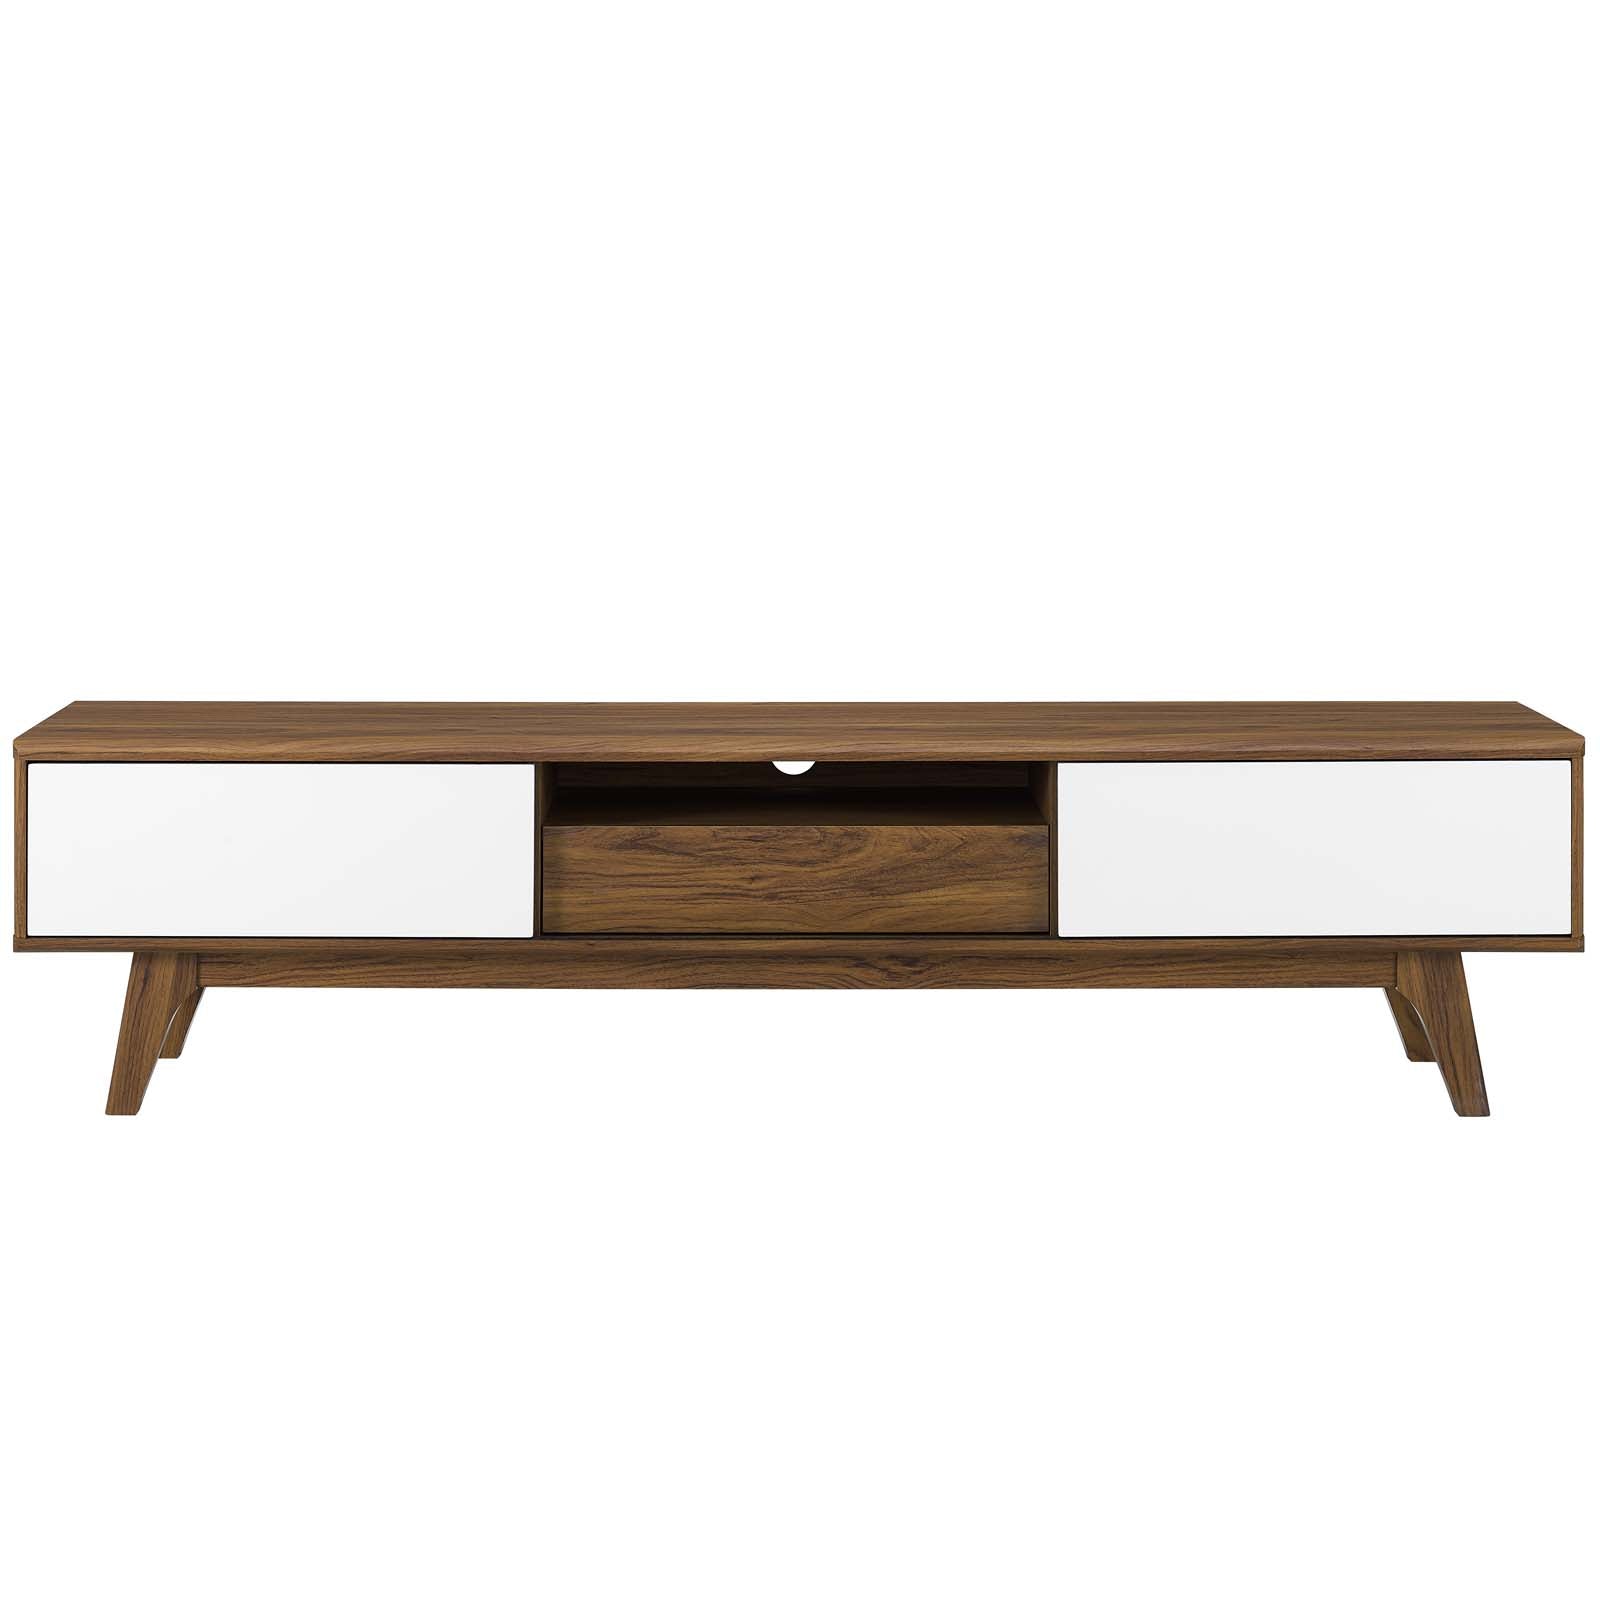 Envision 70" Media Console Wood TV Stand